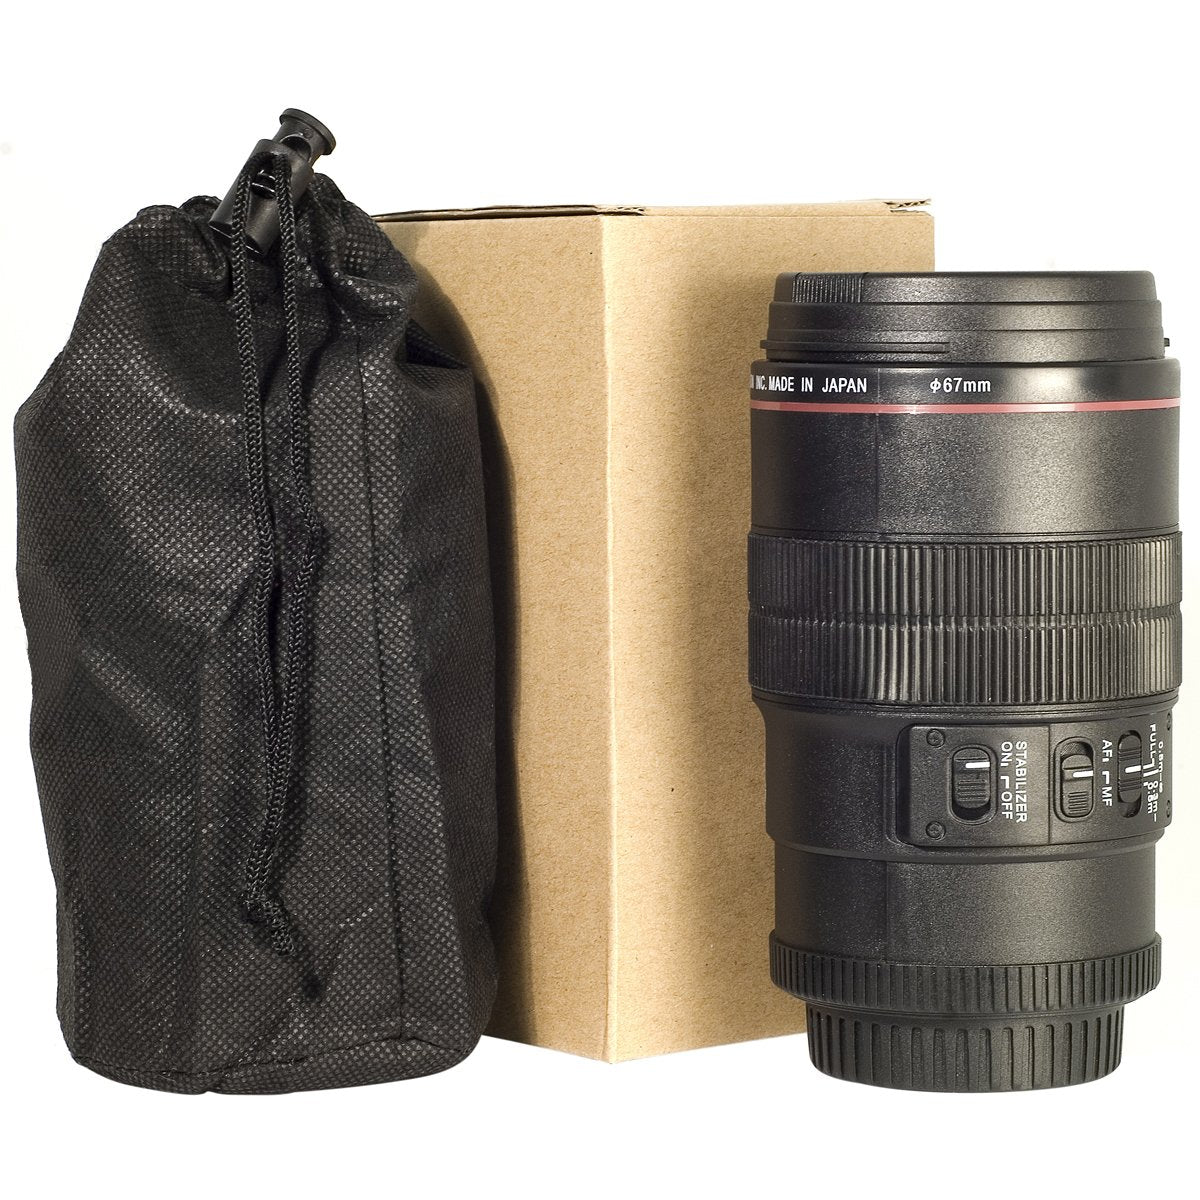 Zenko Camera Lens Cup 350ml , EF Macro 100mm Thermos Travel Coffee Mug with carry pouch